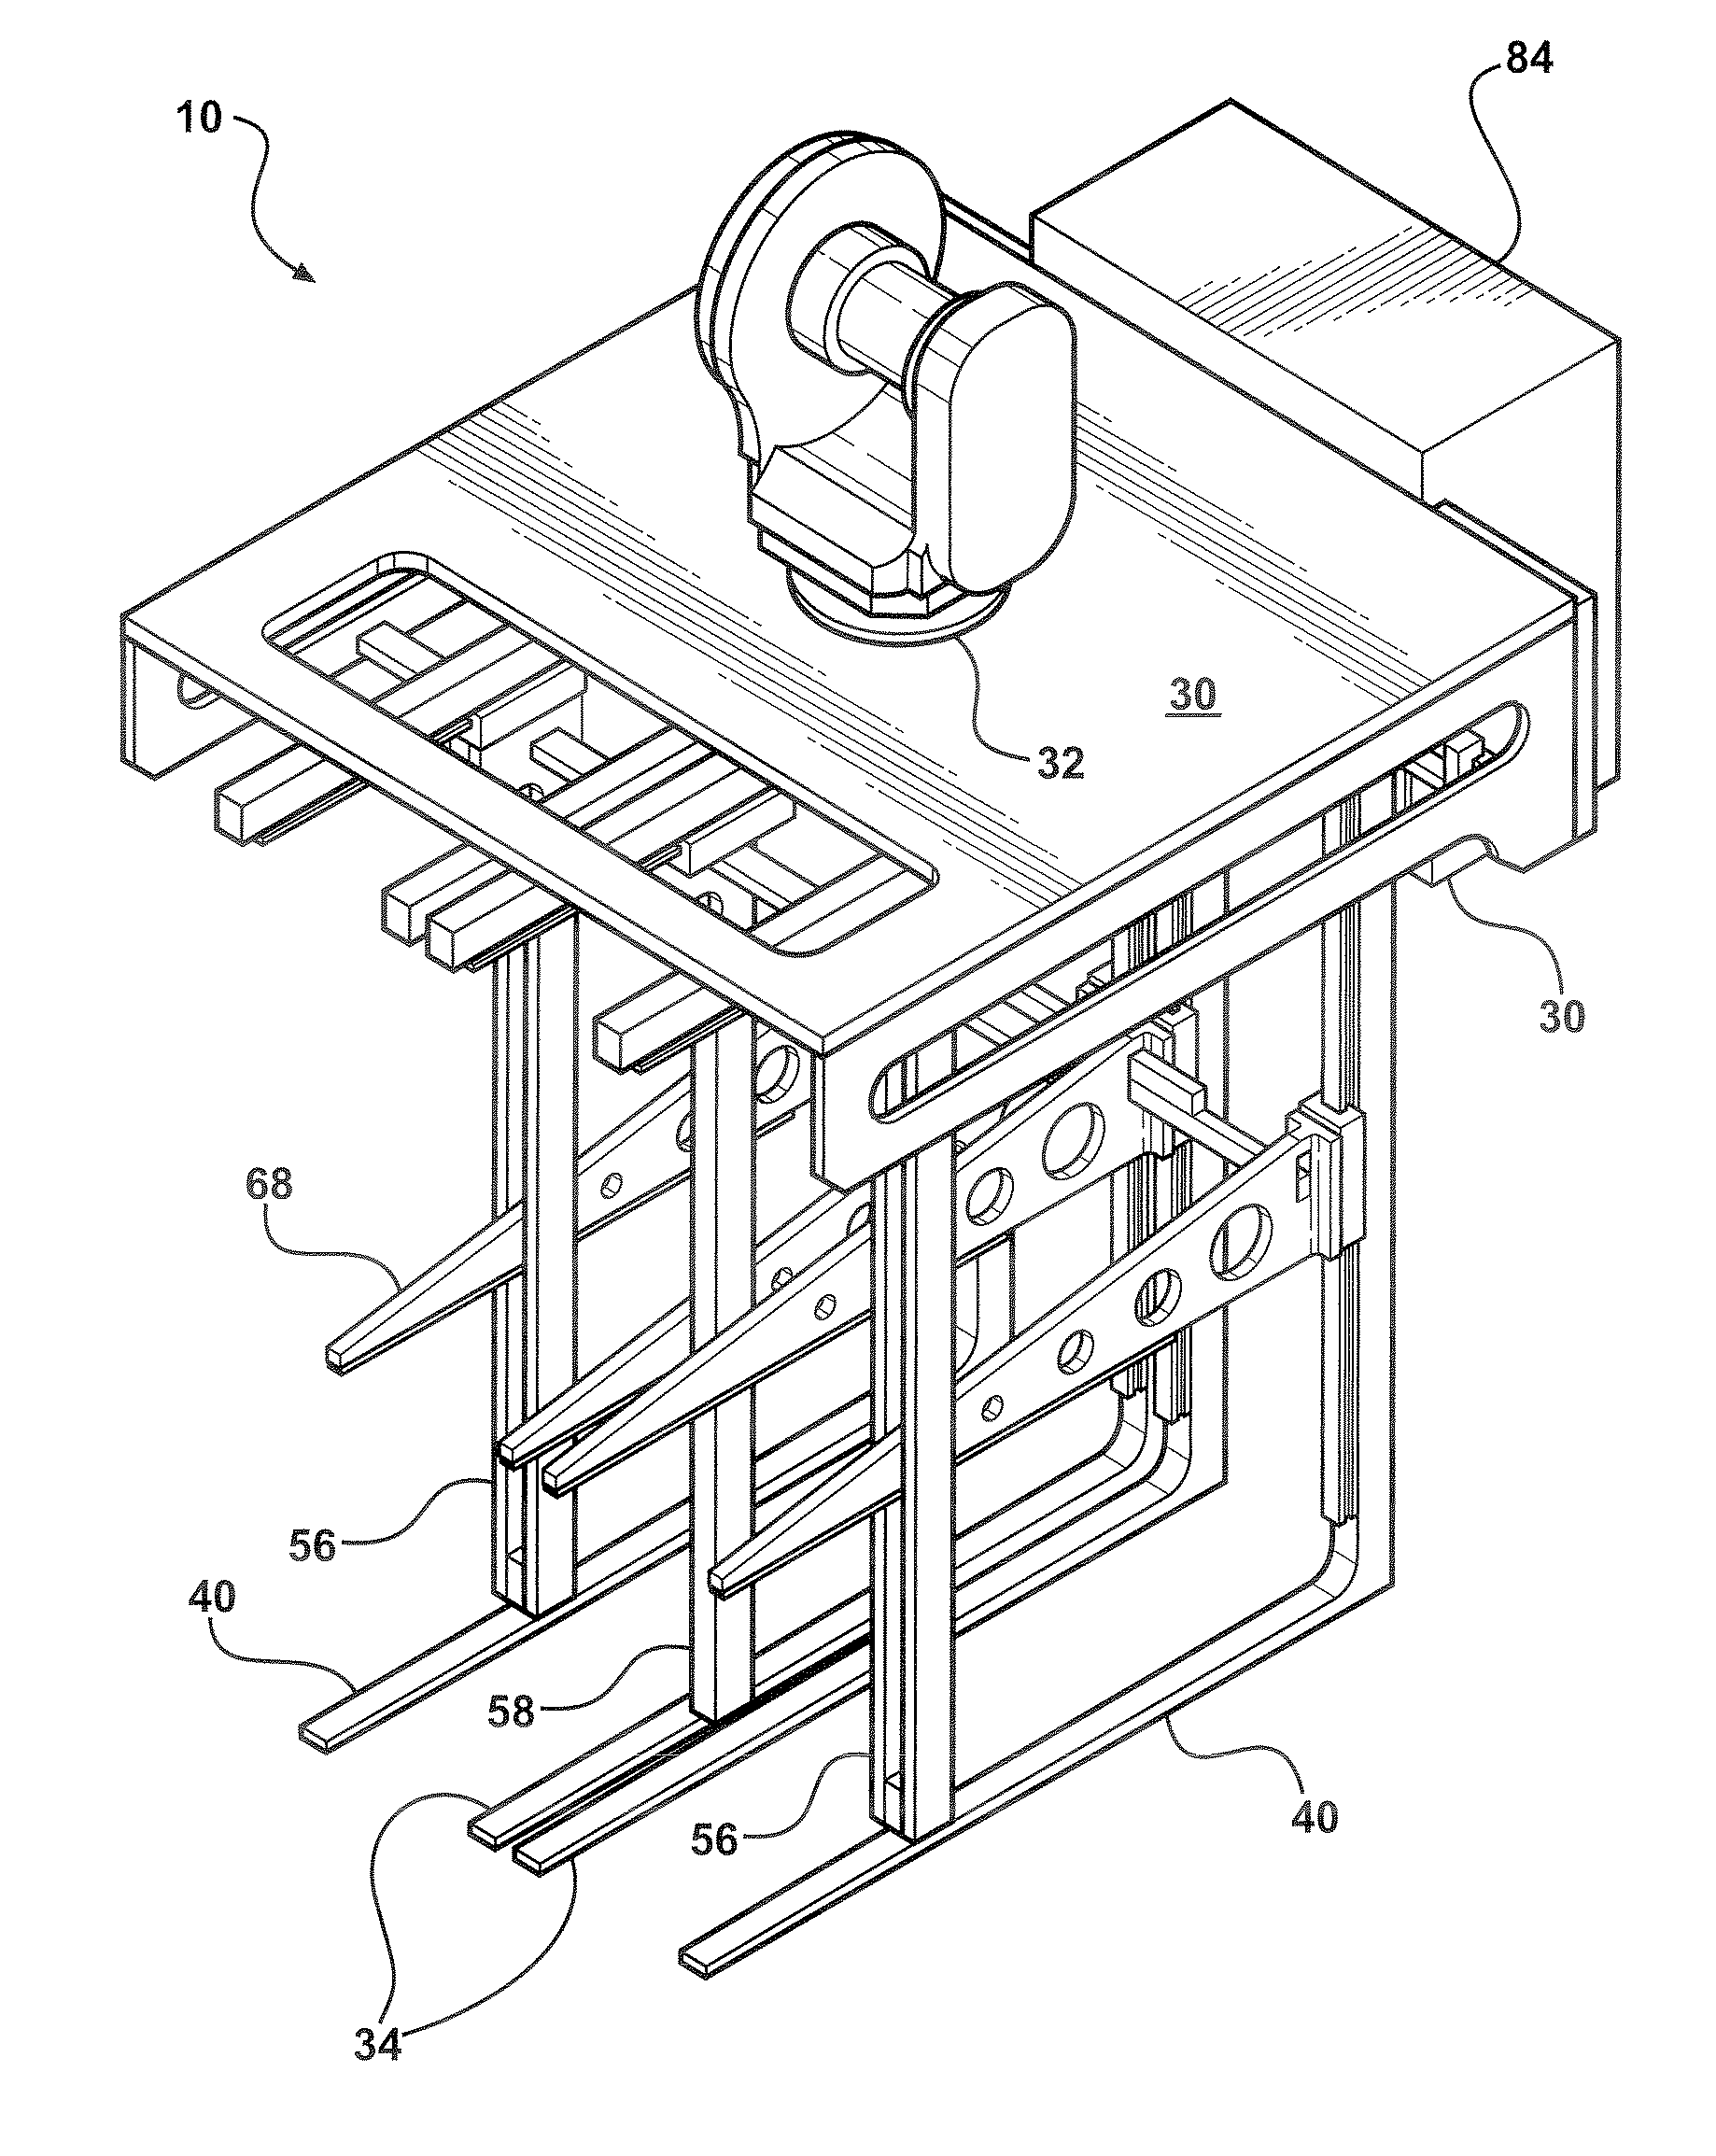 Mixed size product handling end of arm tool